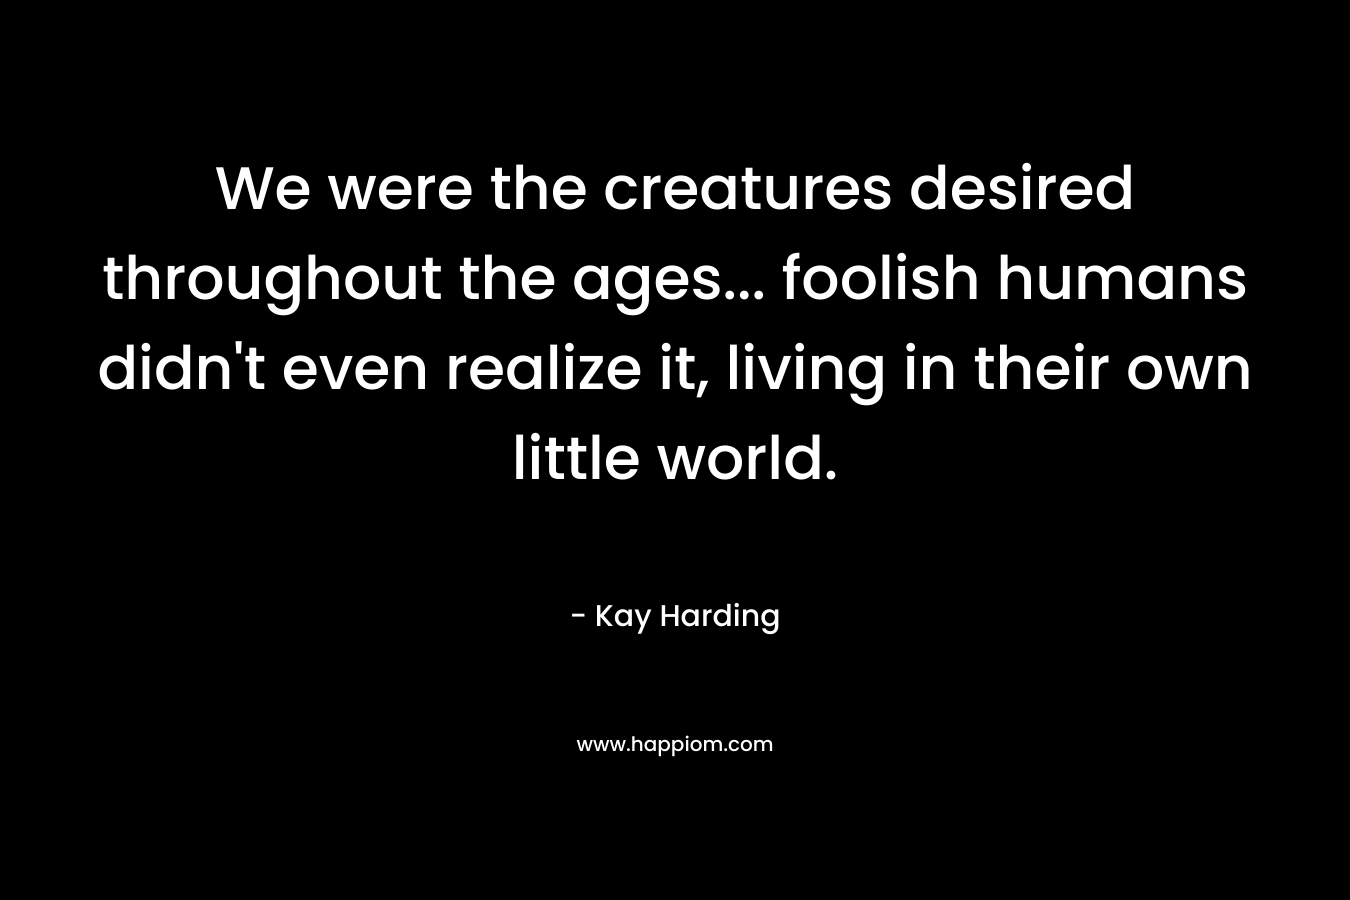 We were the creatures desired throughout the ages... foolish humans didn't even realize it, living in their own little world.